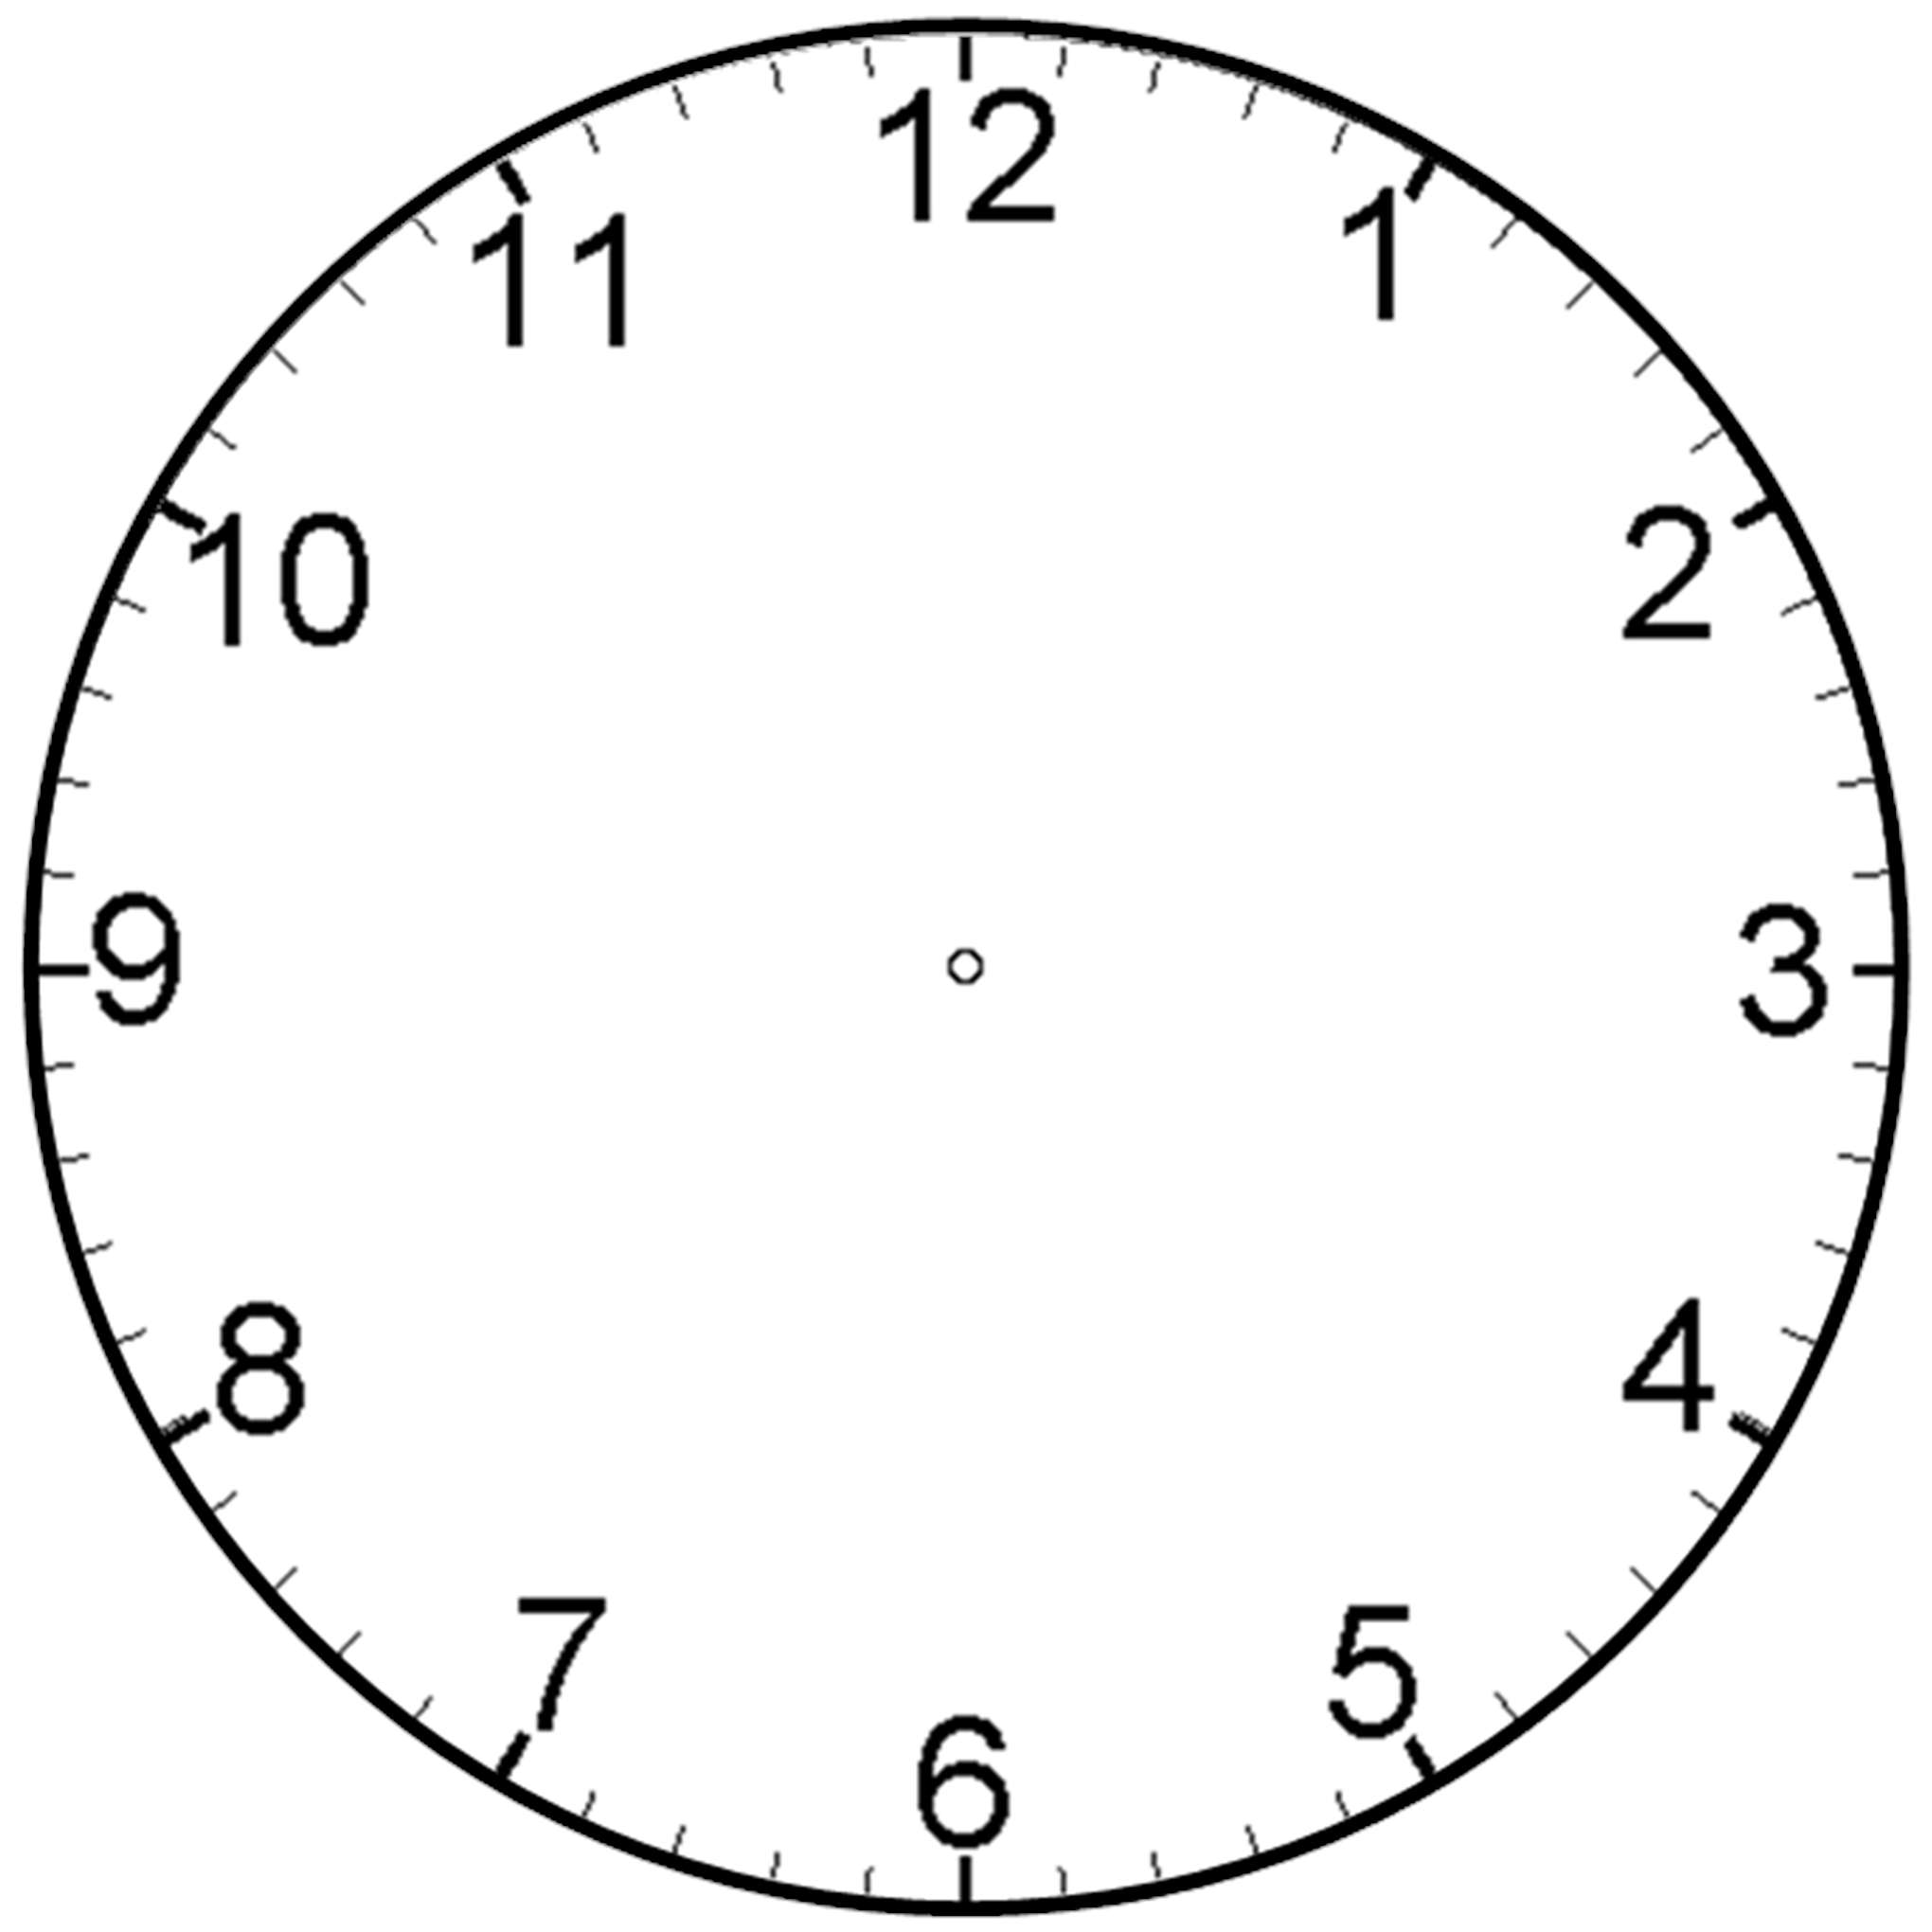 Worksheet. Free Printable Clock Face With Minutes. Noconformity ...